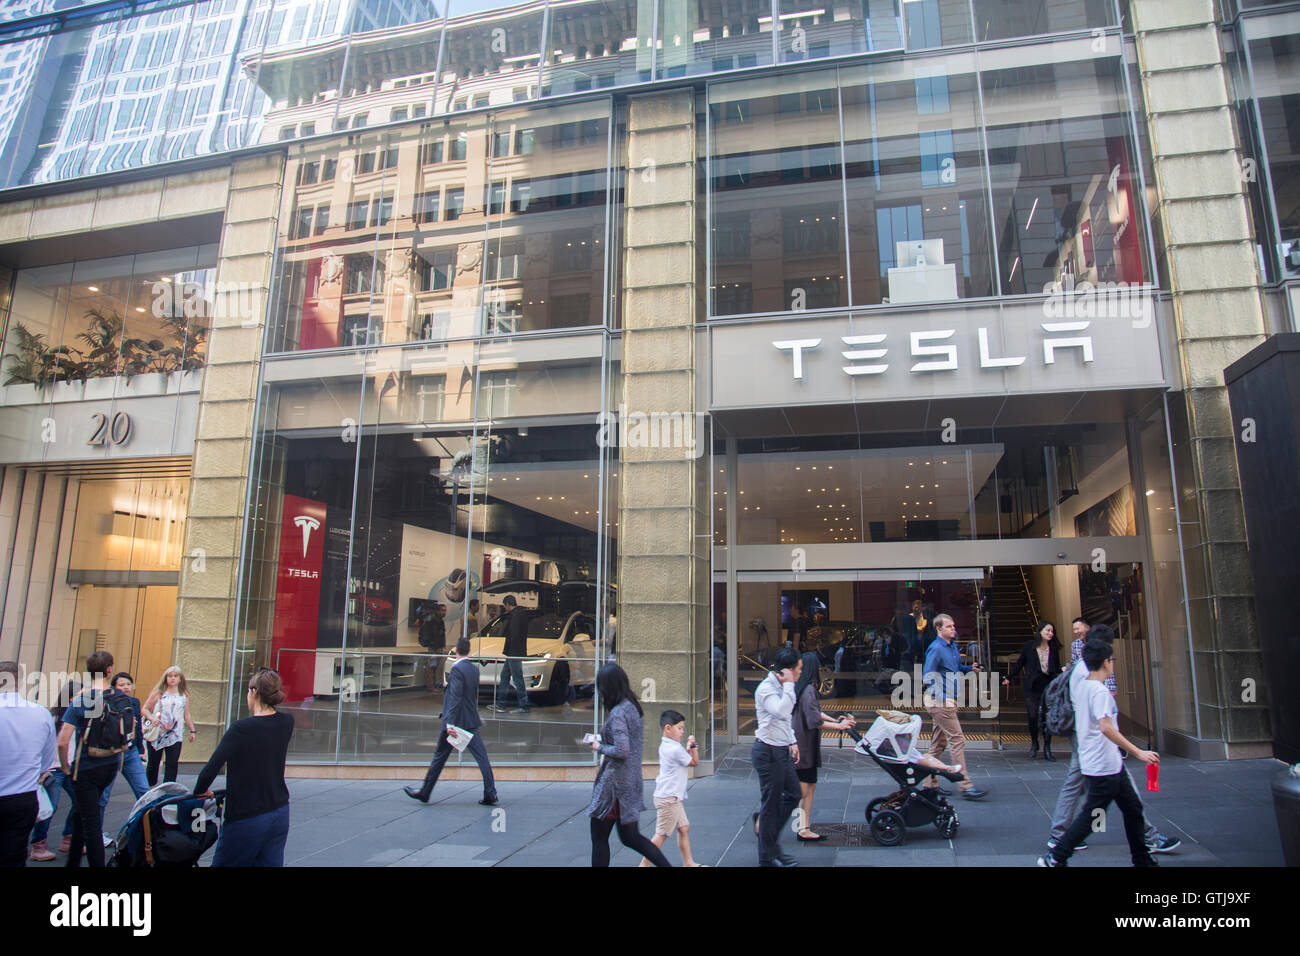 Tesla, electric car company with a showroom in martin place,Sydney city centre,australia,2016 Stock Photo